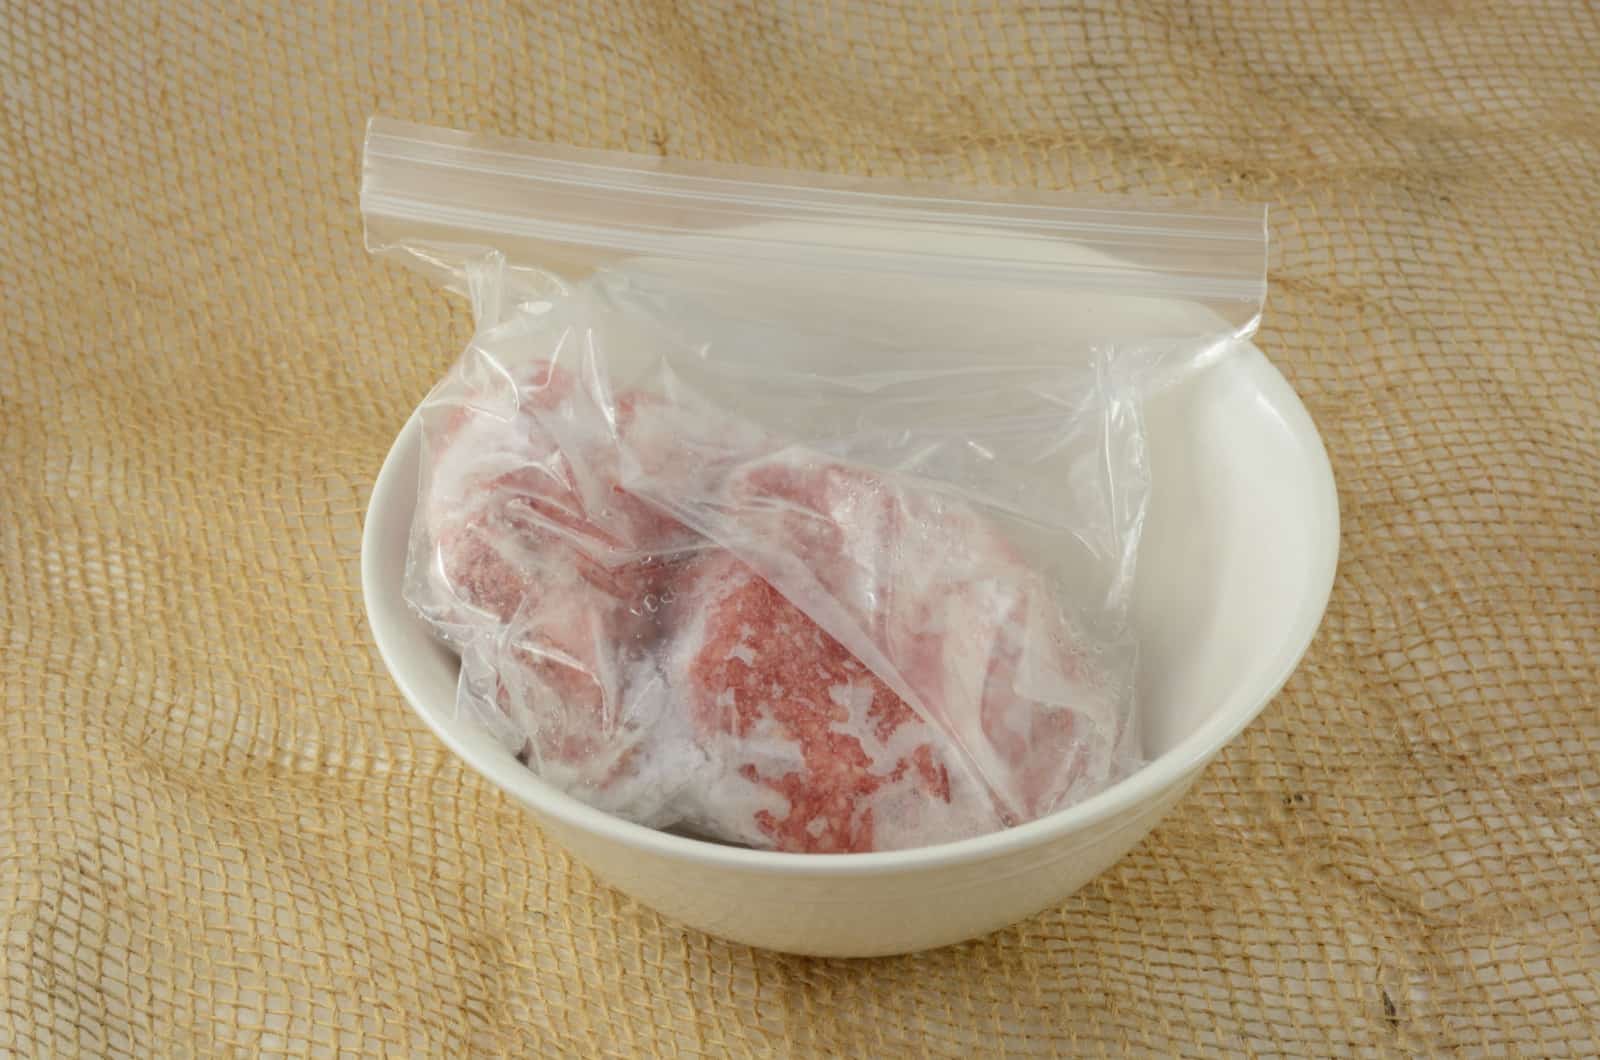 thawed meat in a bowl